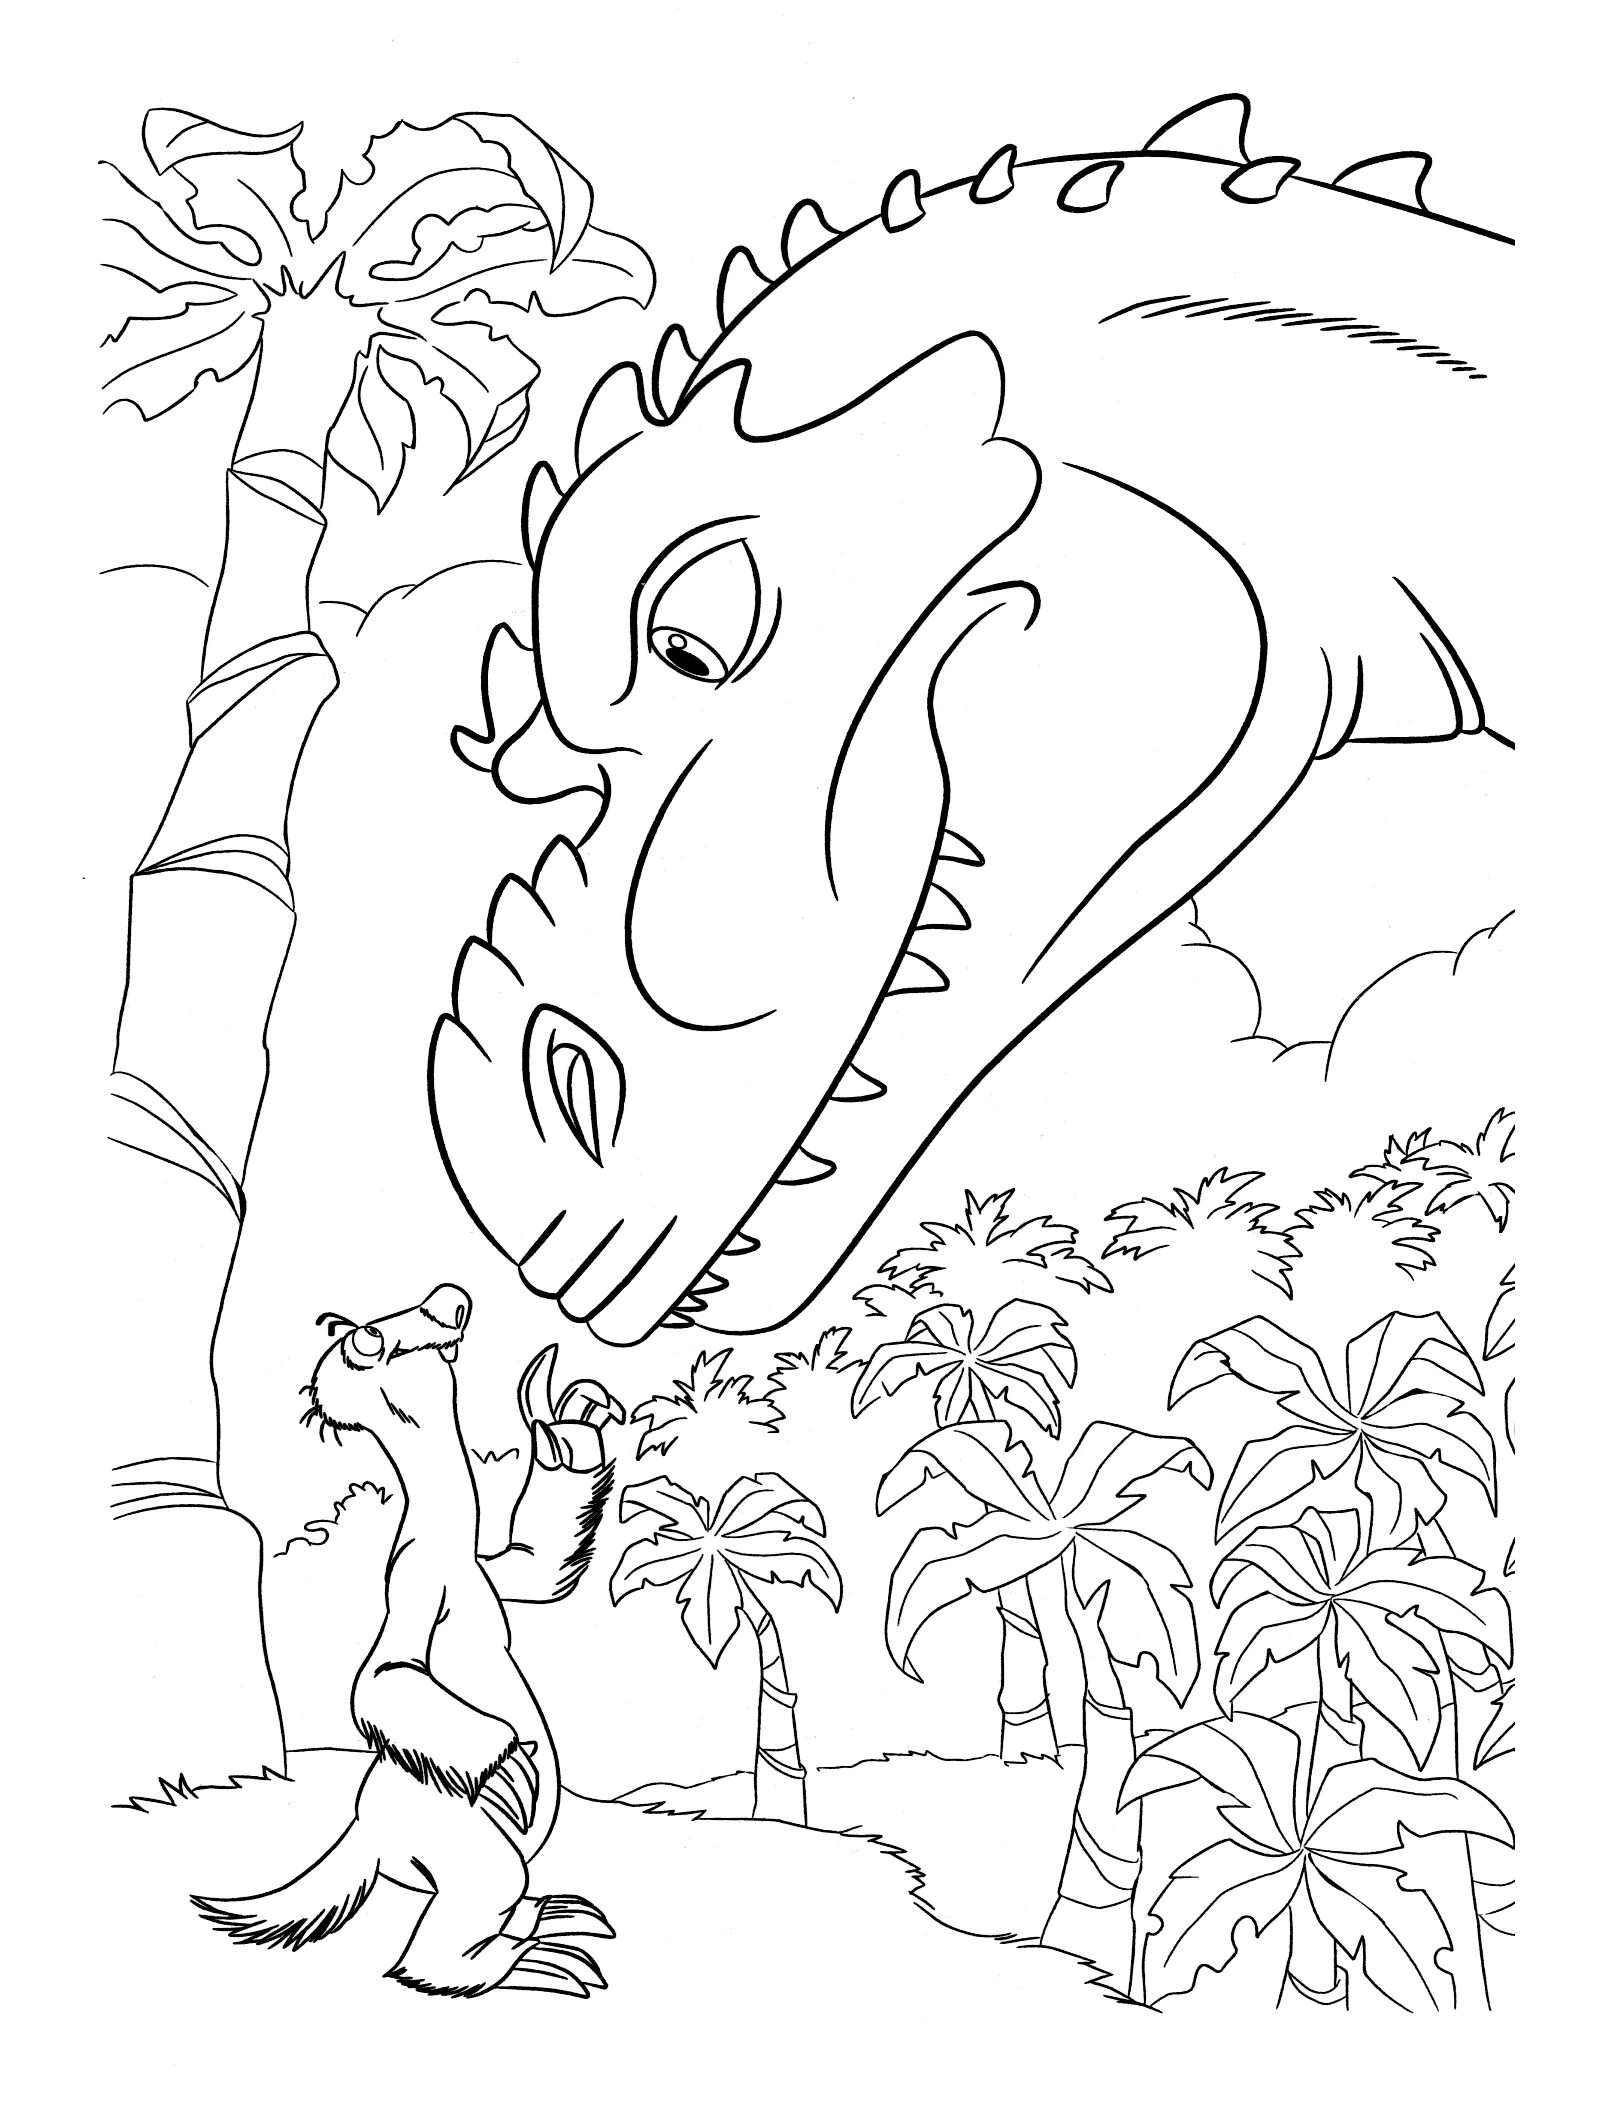 Intriguing coloring book ice age dinosaurs